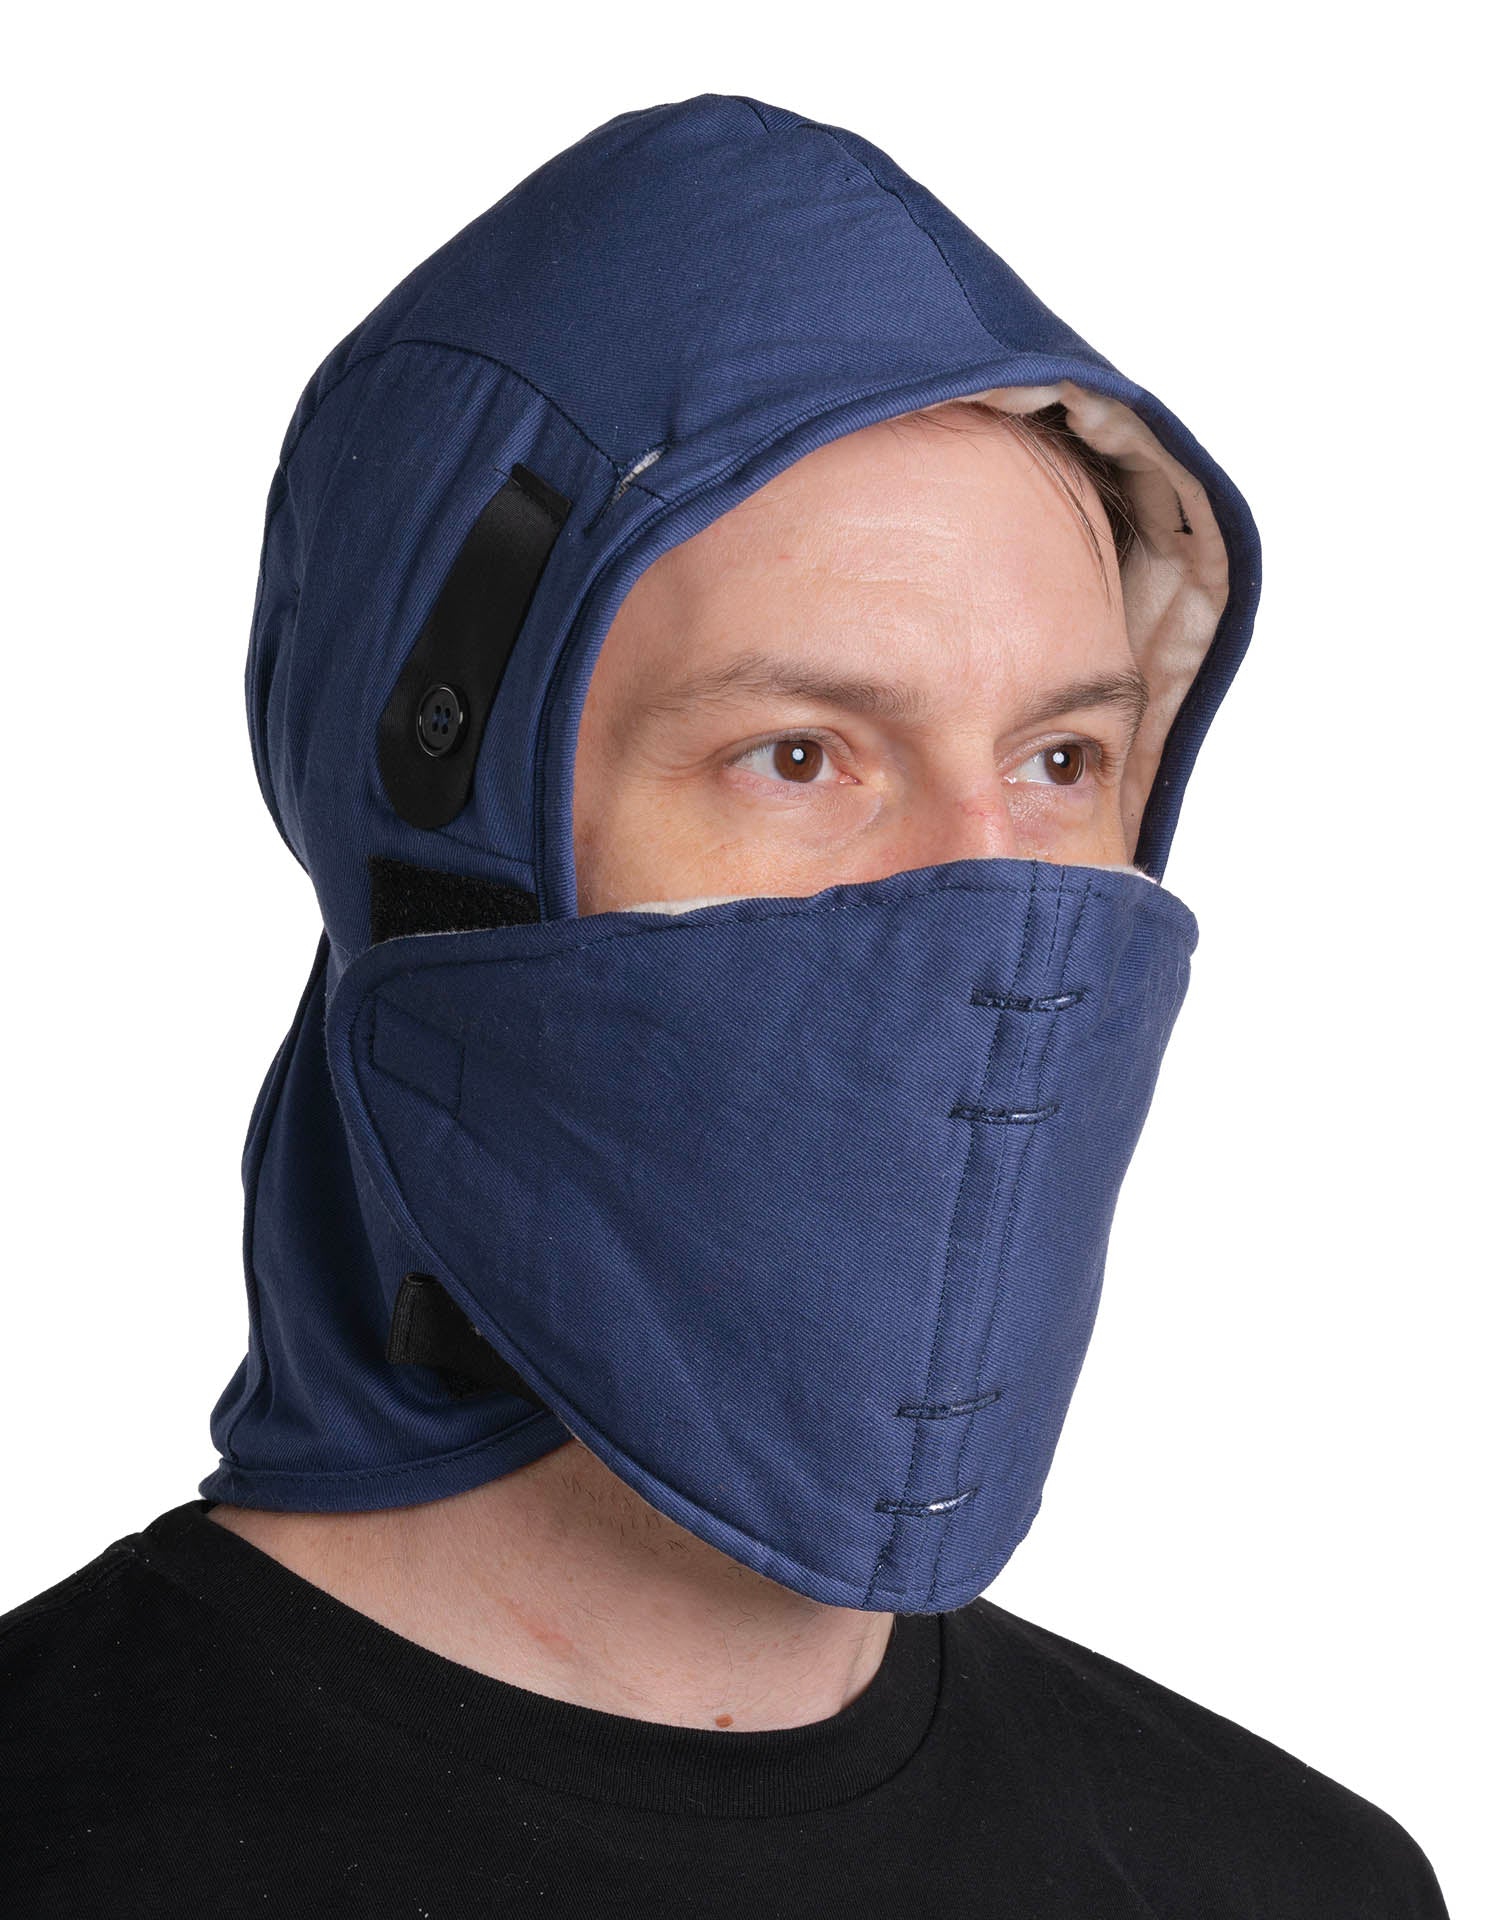 Winter Hard Hat Liner with Face Mask